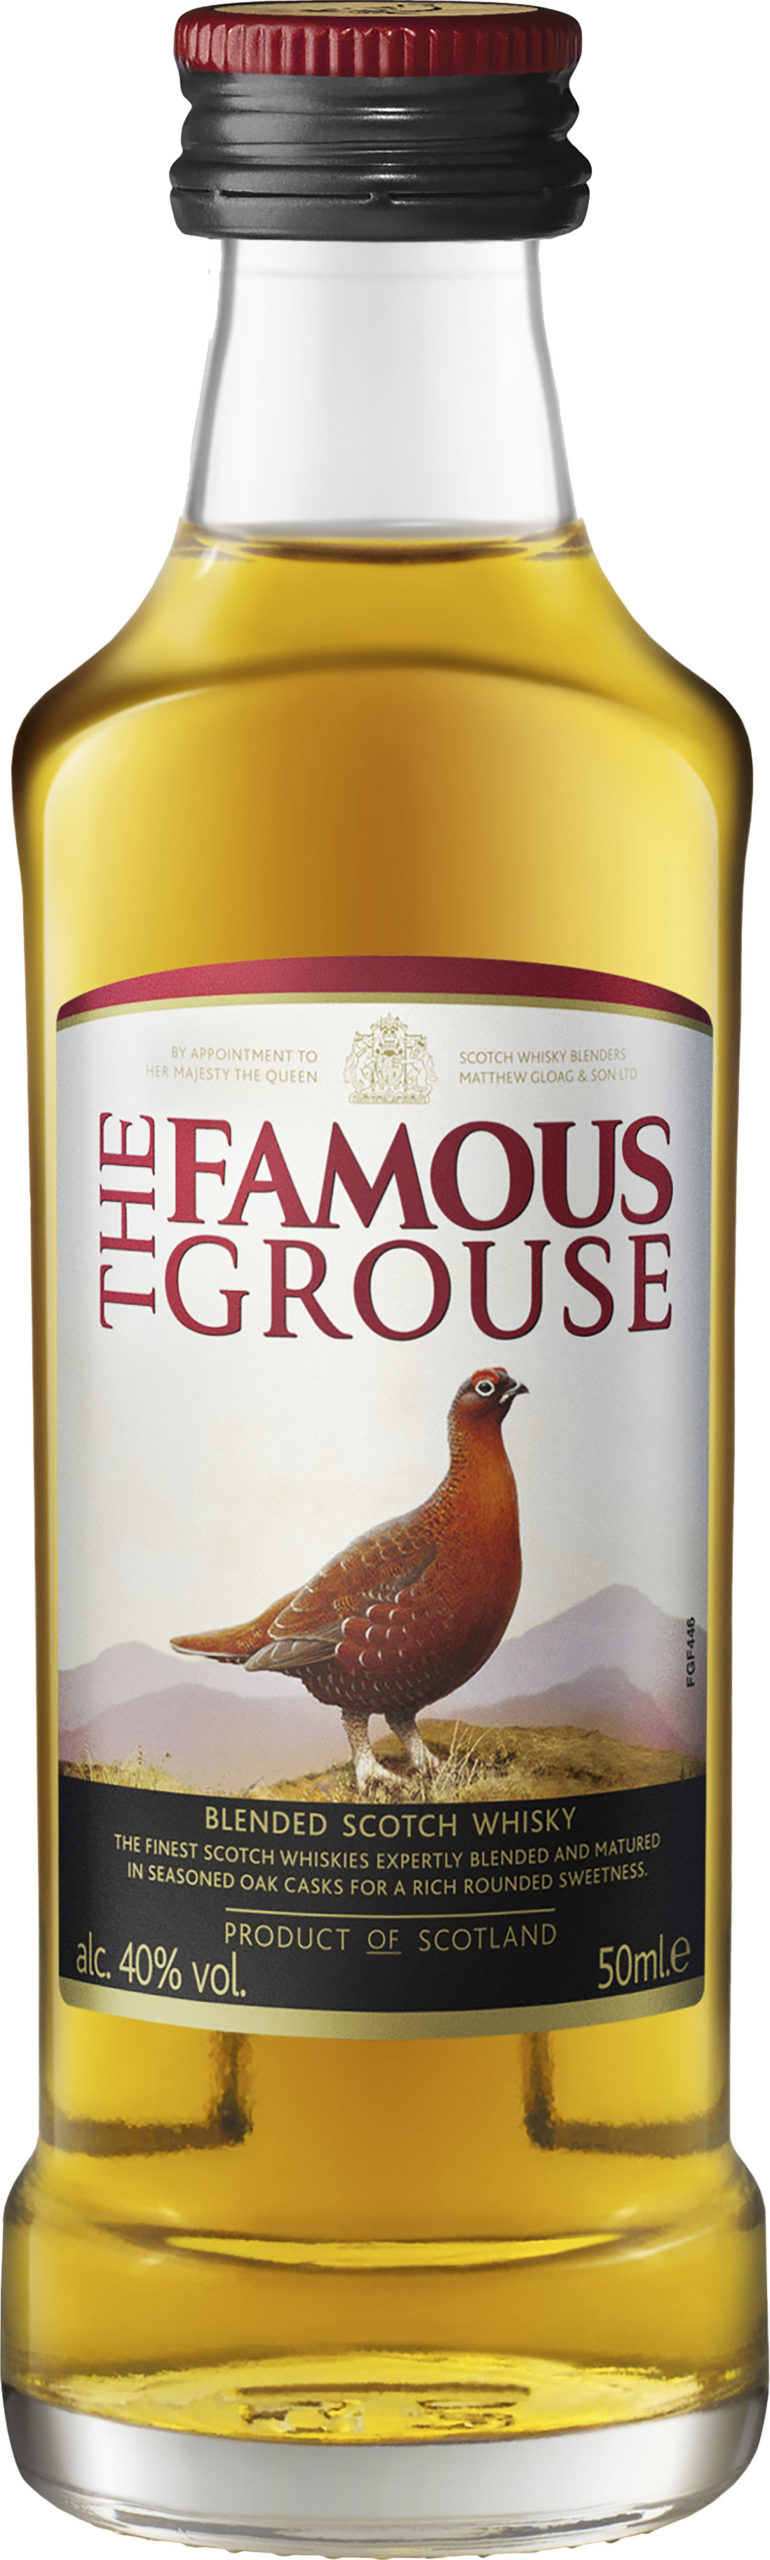 The Famous Grouse Whiskey